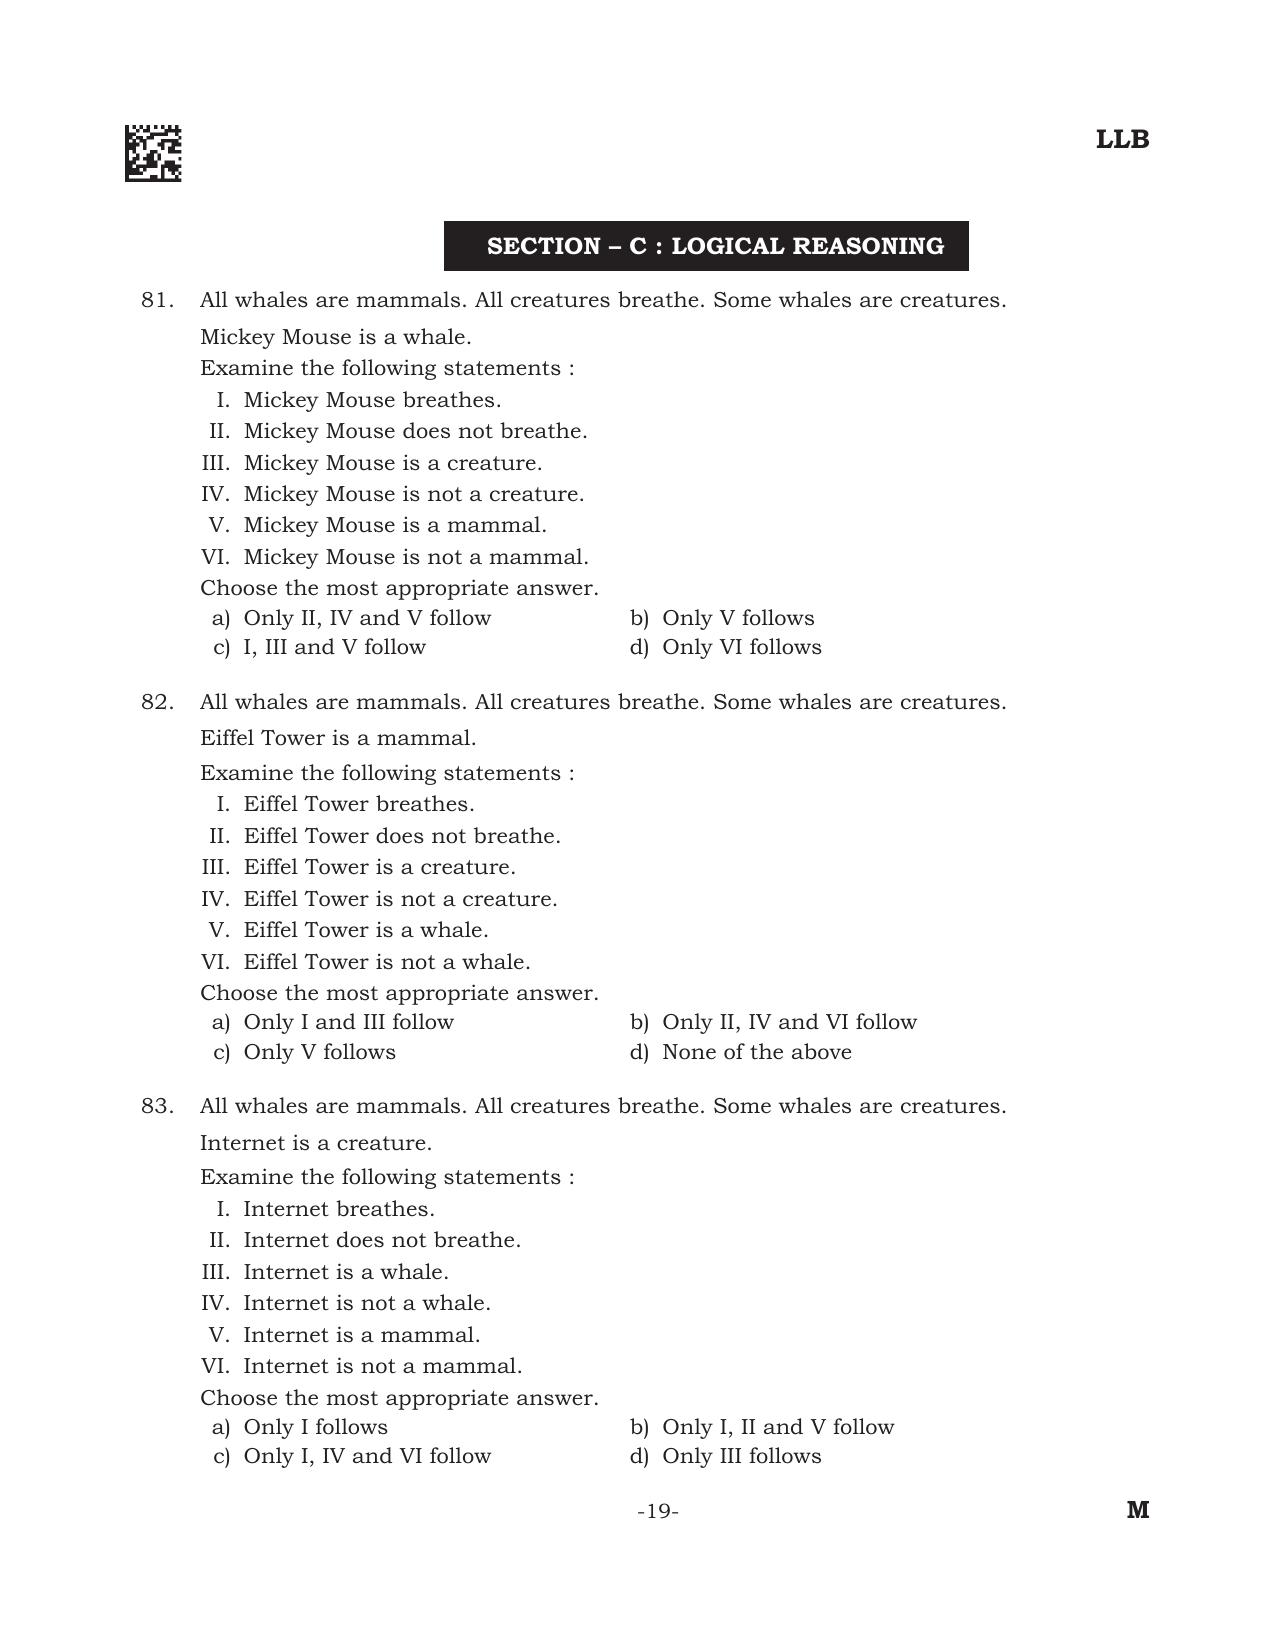 AILET 2022 Question Paper for BA LLB - Page 19